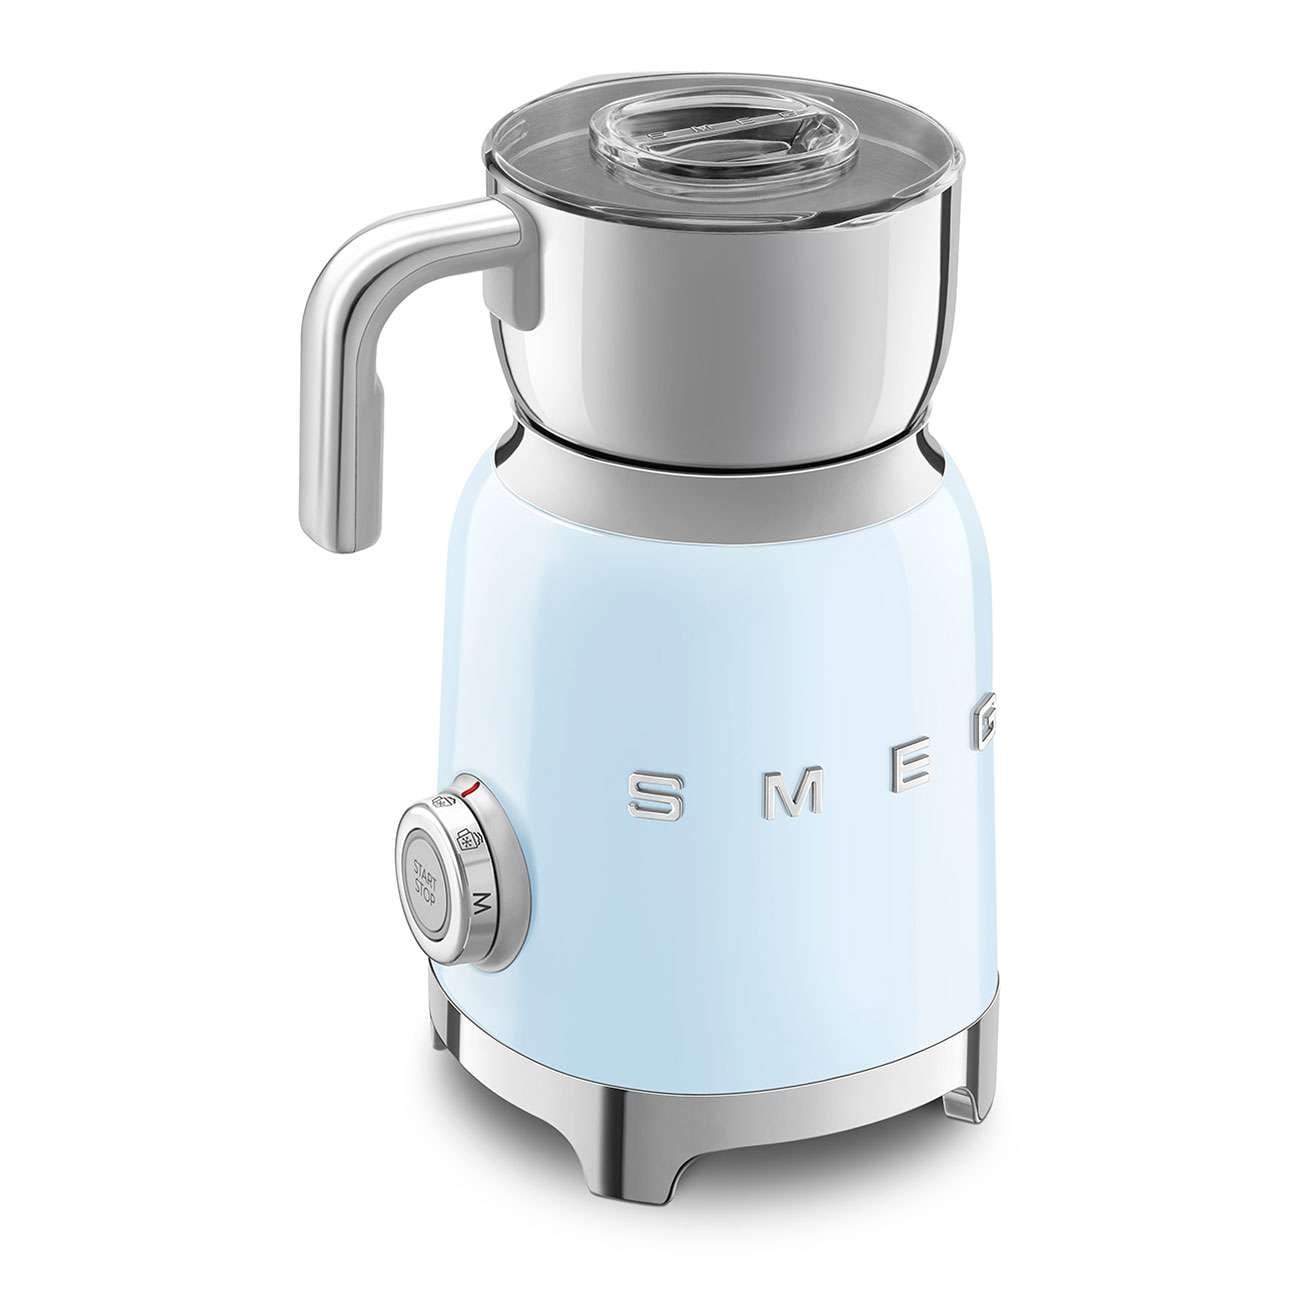 https://ak1.ostkcdn.com/images/products/is/images/direct/8040a21c35150a8b032d75ba694752d6004e636f/SMEG-Milk-Frother-MFF11.jpg